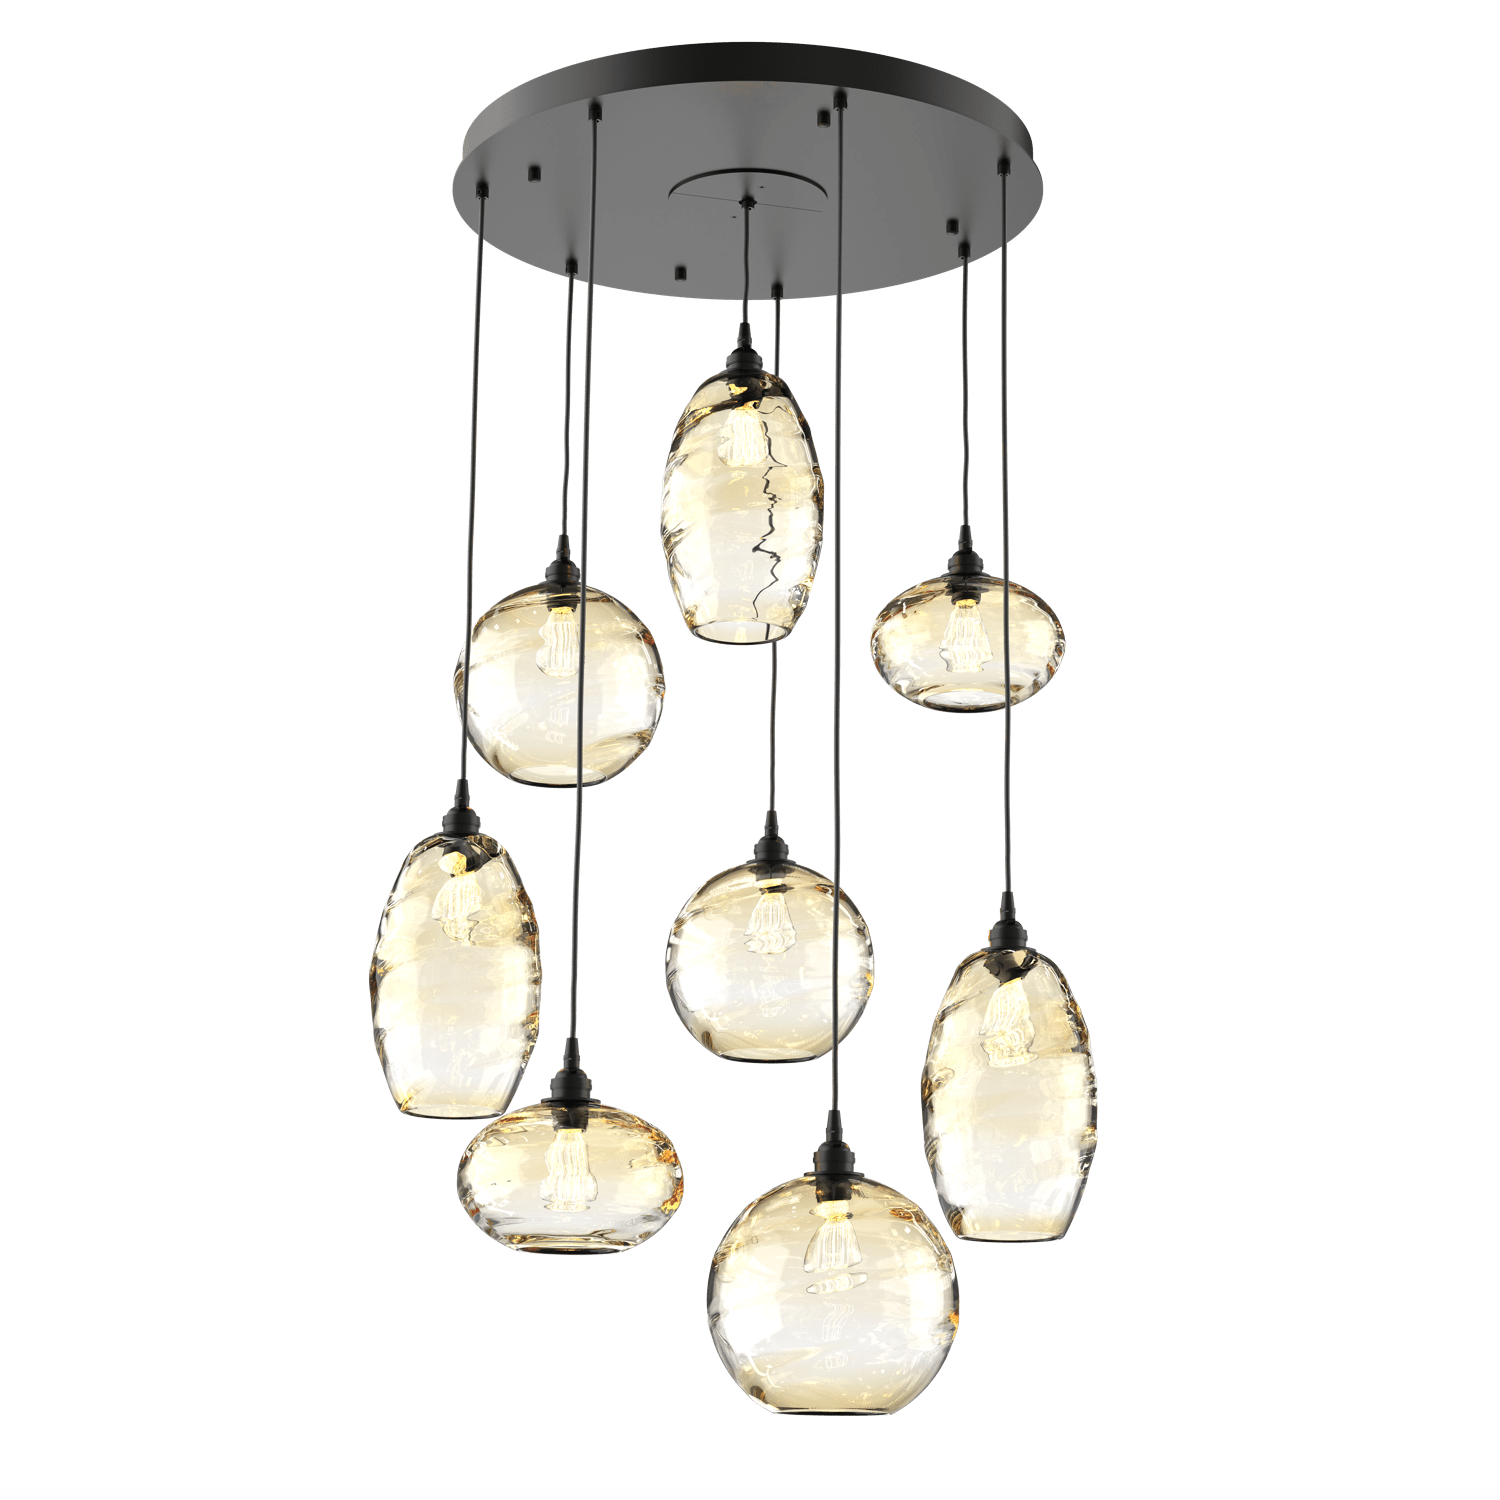 CHB0048-08-MB-OA-Hammerton-Studio-Optic-Blown-Glass-Misto-8-light-round-pendant-chandelier-with-matte-black-finish-and-optic-amber-blown-glass-shades-and-incandescent-lamping